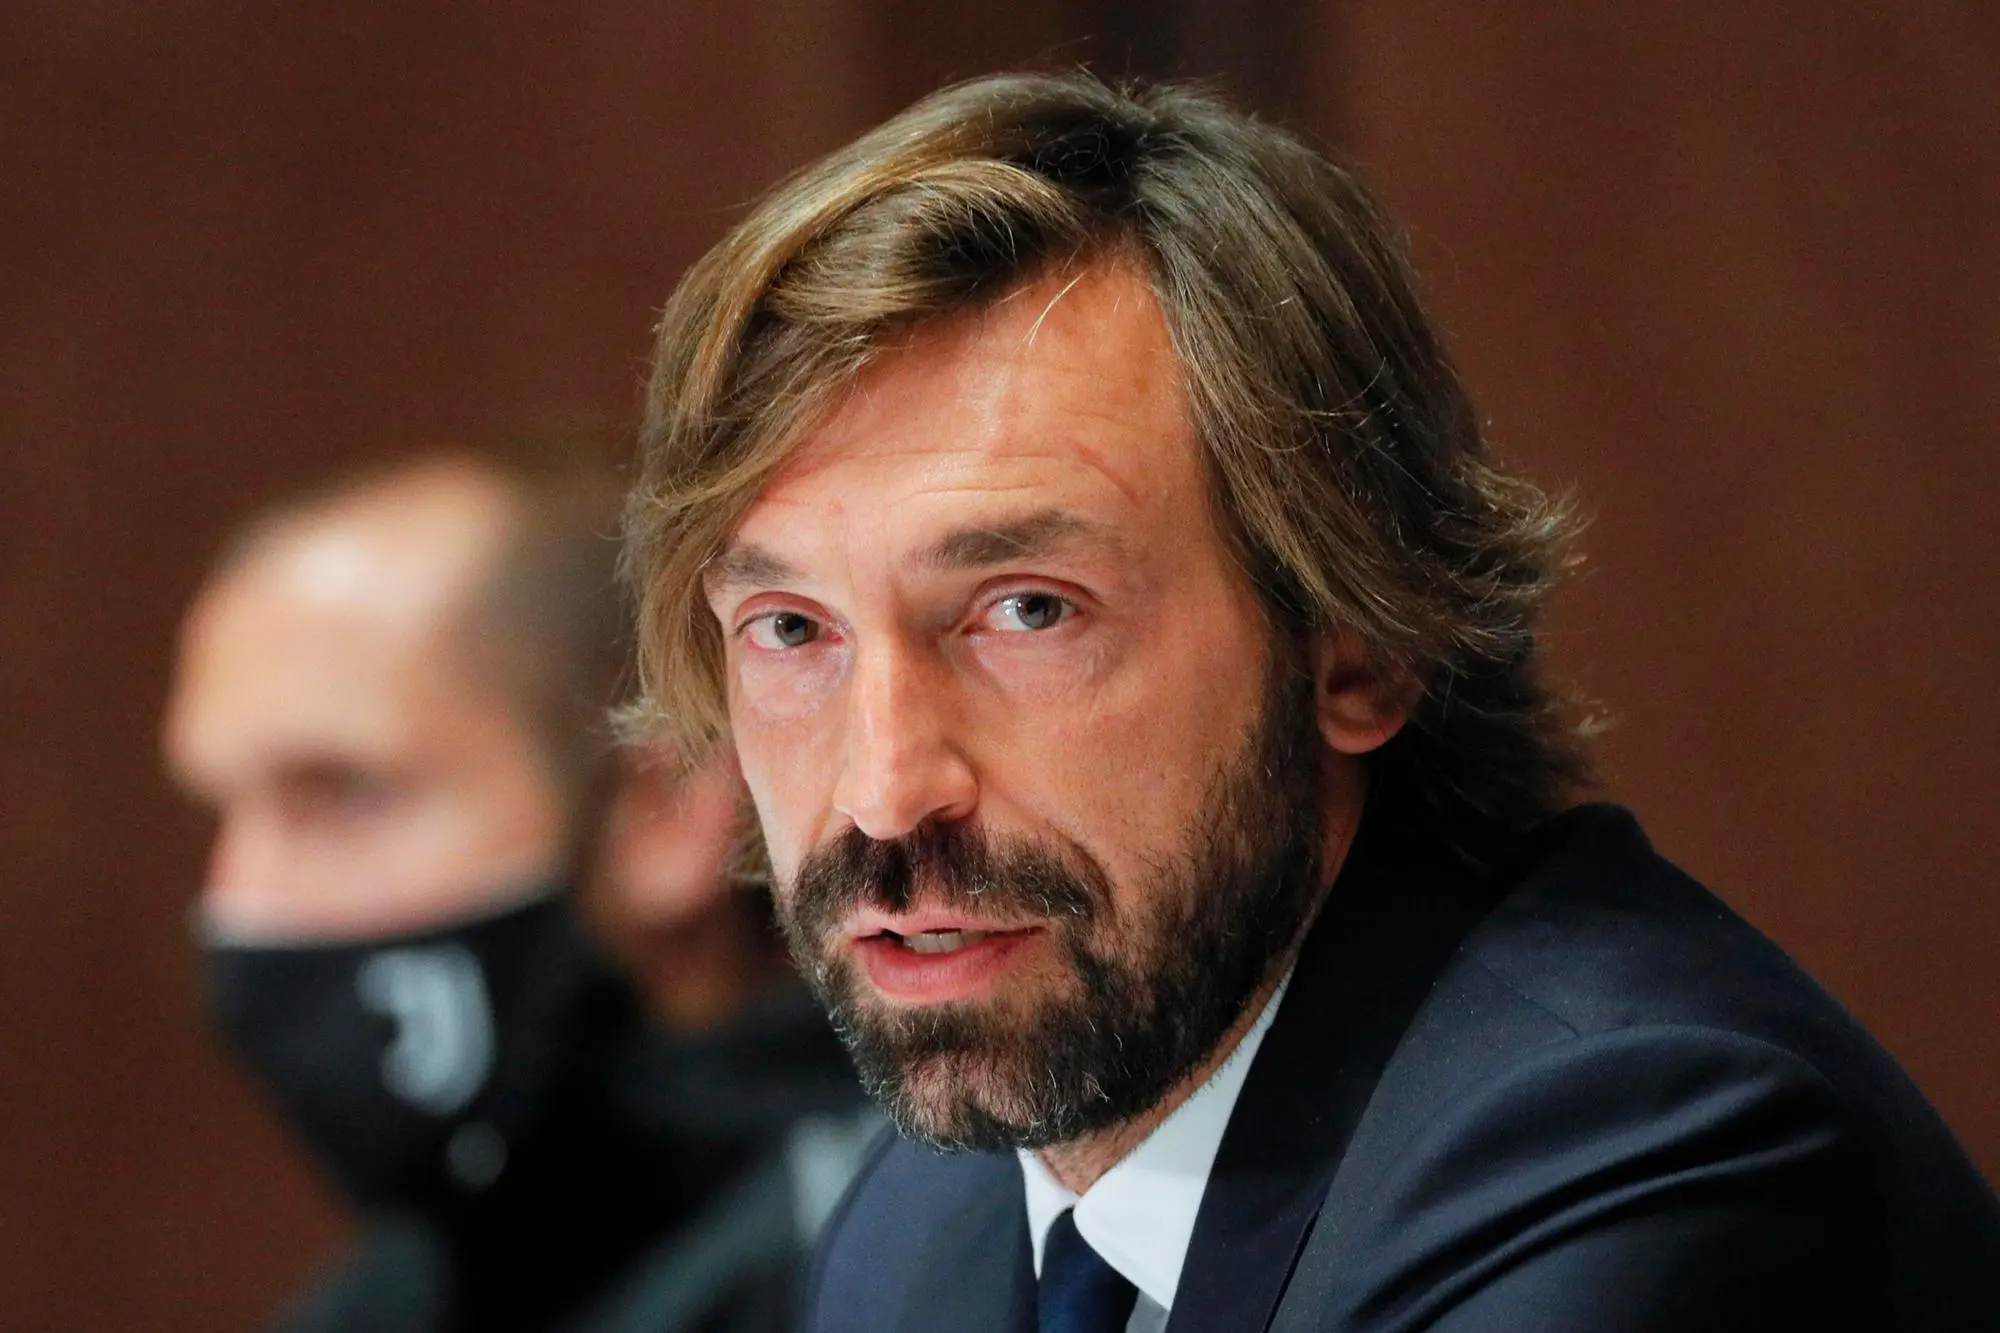 epa08757850 Juventus' head coach Andrea Pirlo speaks during a press conference in Kiev, Ukraine, 19 October 2020. Juventus FC will face Dynamo Kiev in their UEFA Champions League group G soccer match on 20 October 2020. EPA/SERGEY DOLZHENKO